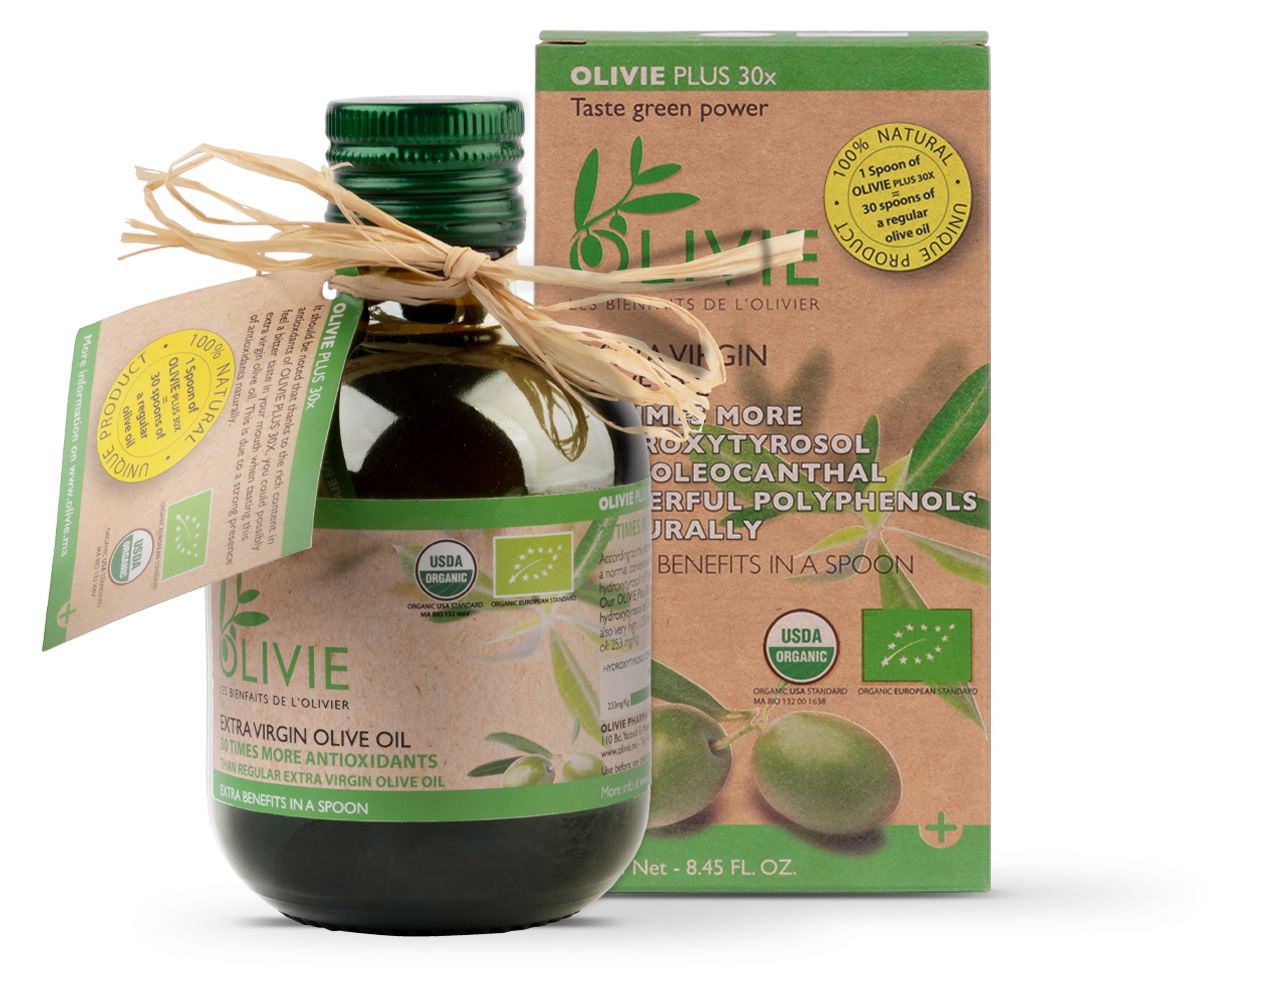 OLIVIE PLUS 30X is Dr Gundry polyphenols rich olive oil from Morocco Desert. Organic and healthiest!